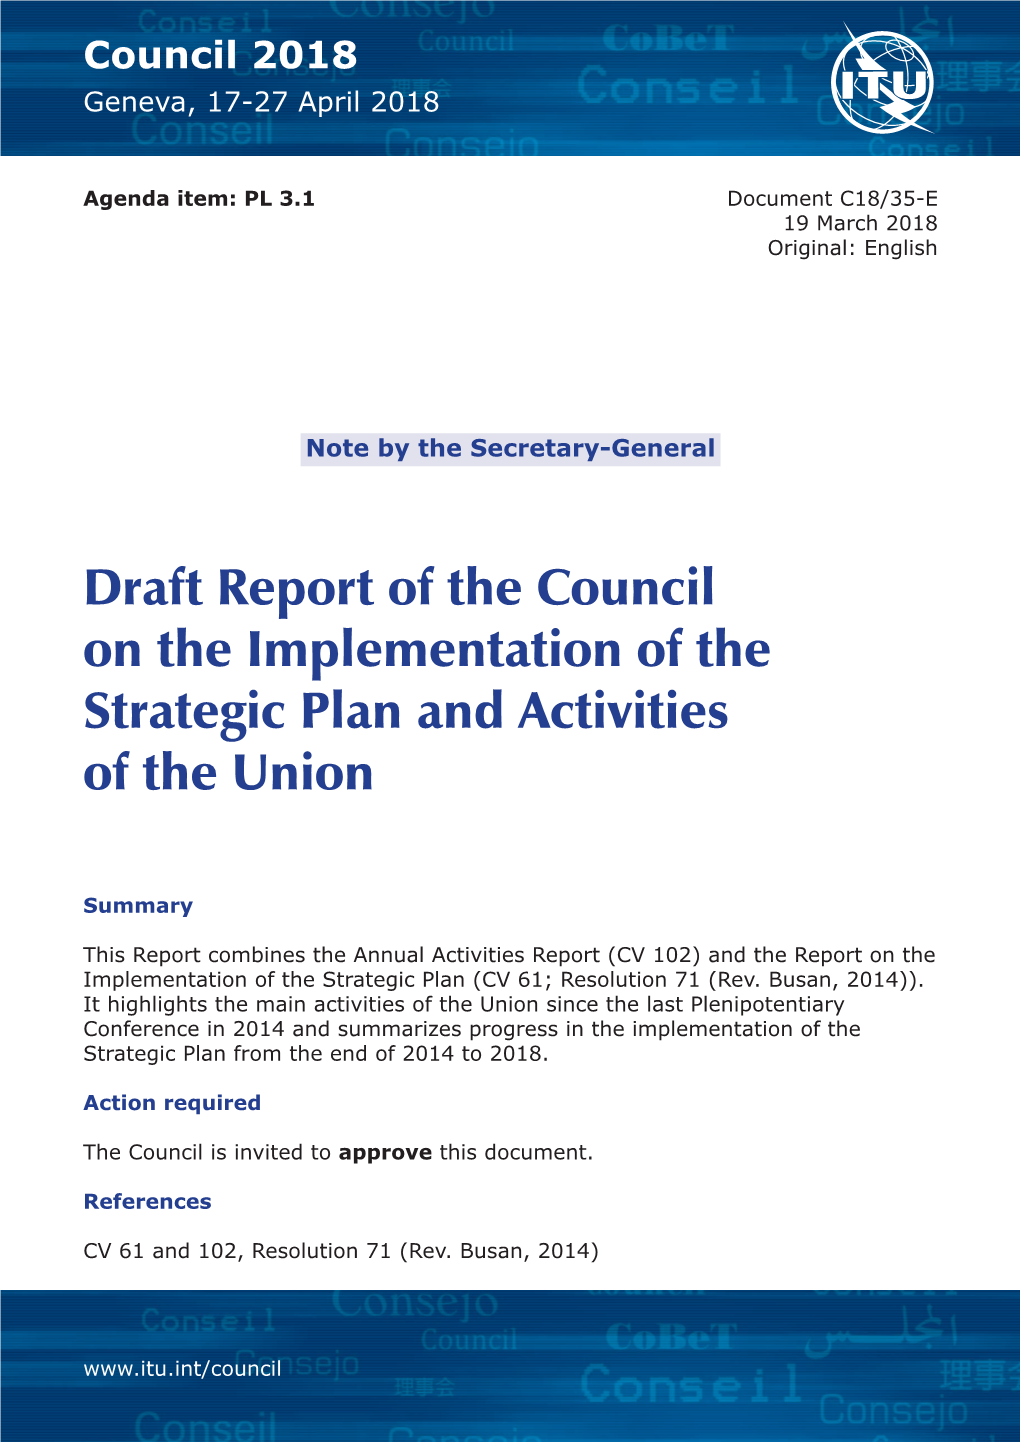 Report on the Implementation of the Strategic Plan and Activities of the Union